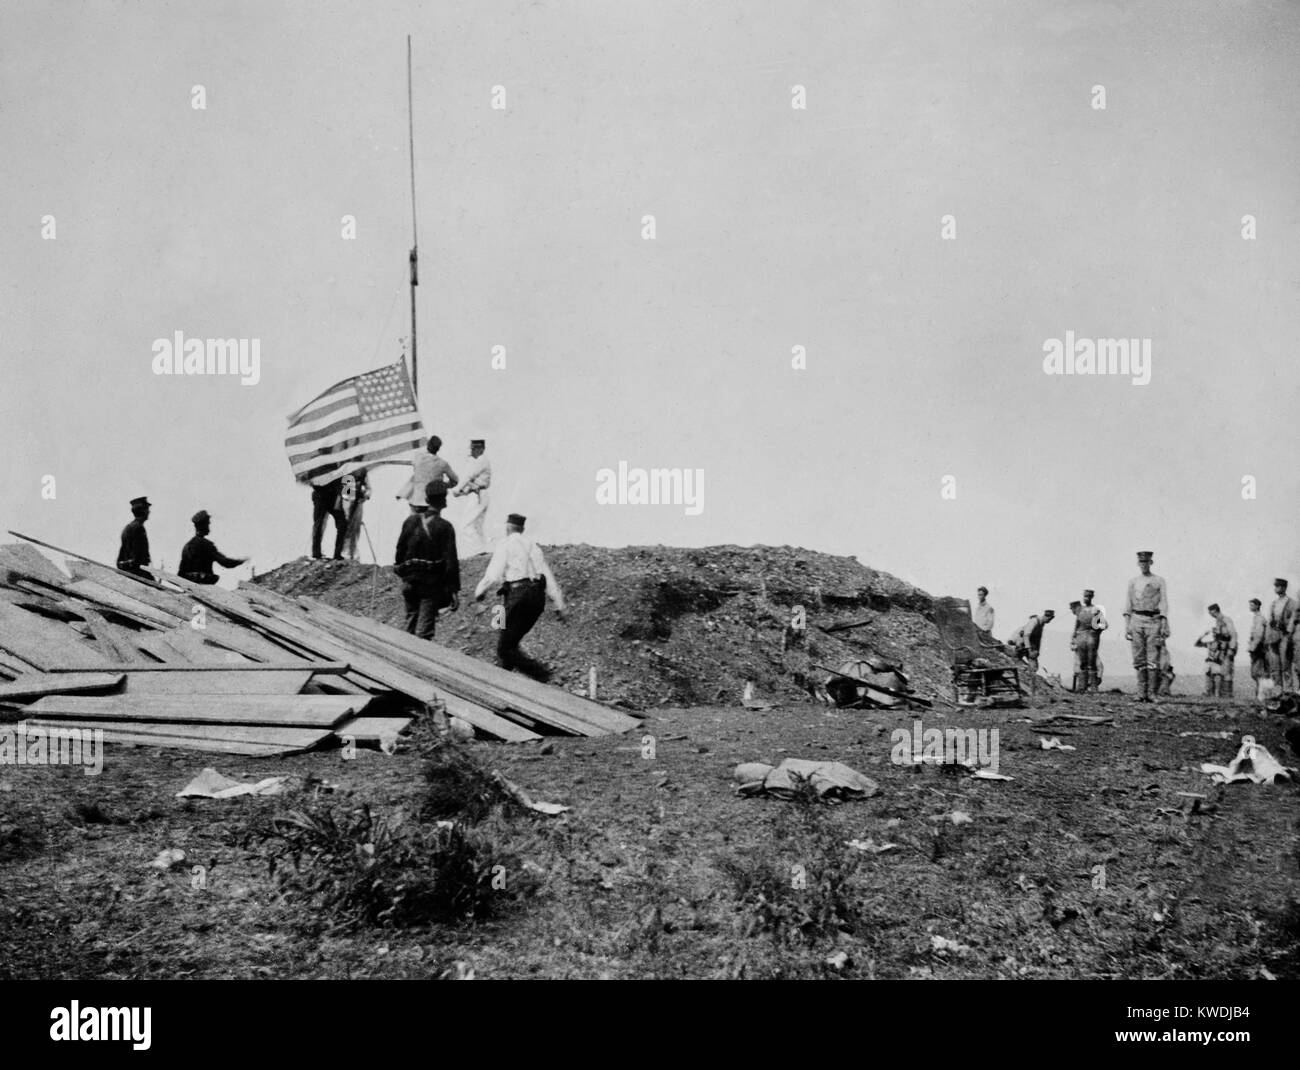 Hoisting the flag at Guantanamo, June 12, 1898 during the Battle of Camp McCalla. The Marines invaded on June 6th, and supported by 3 ships of the US Navy, withstood the resistance of Spanish troops, with six Marines killed in action (BSLOC 2017 10 20) Stock Photo